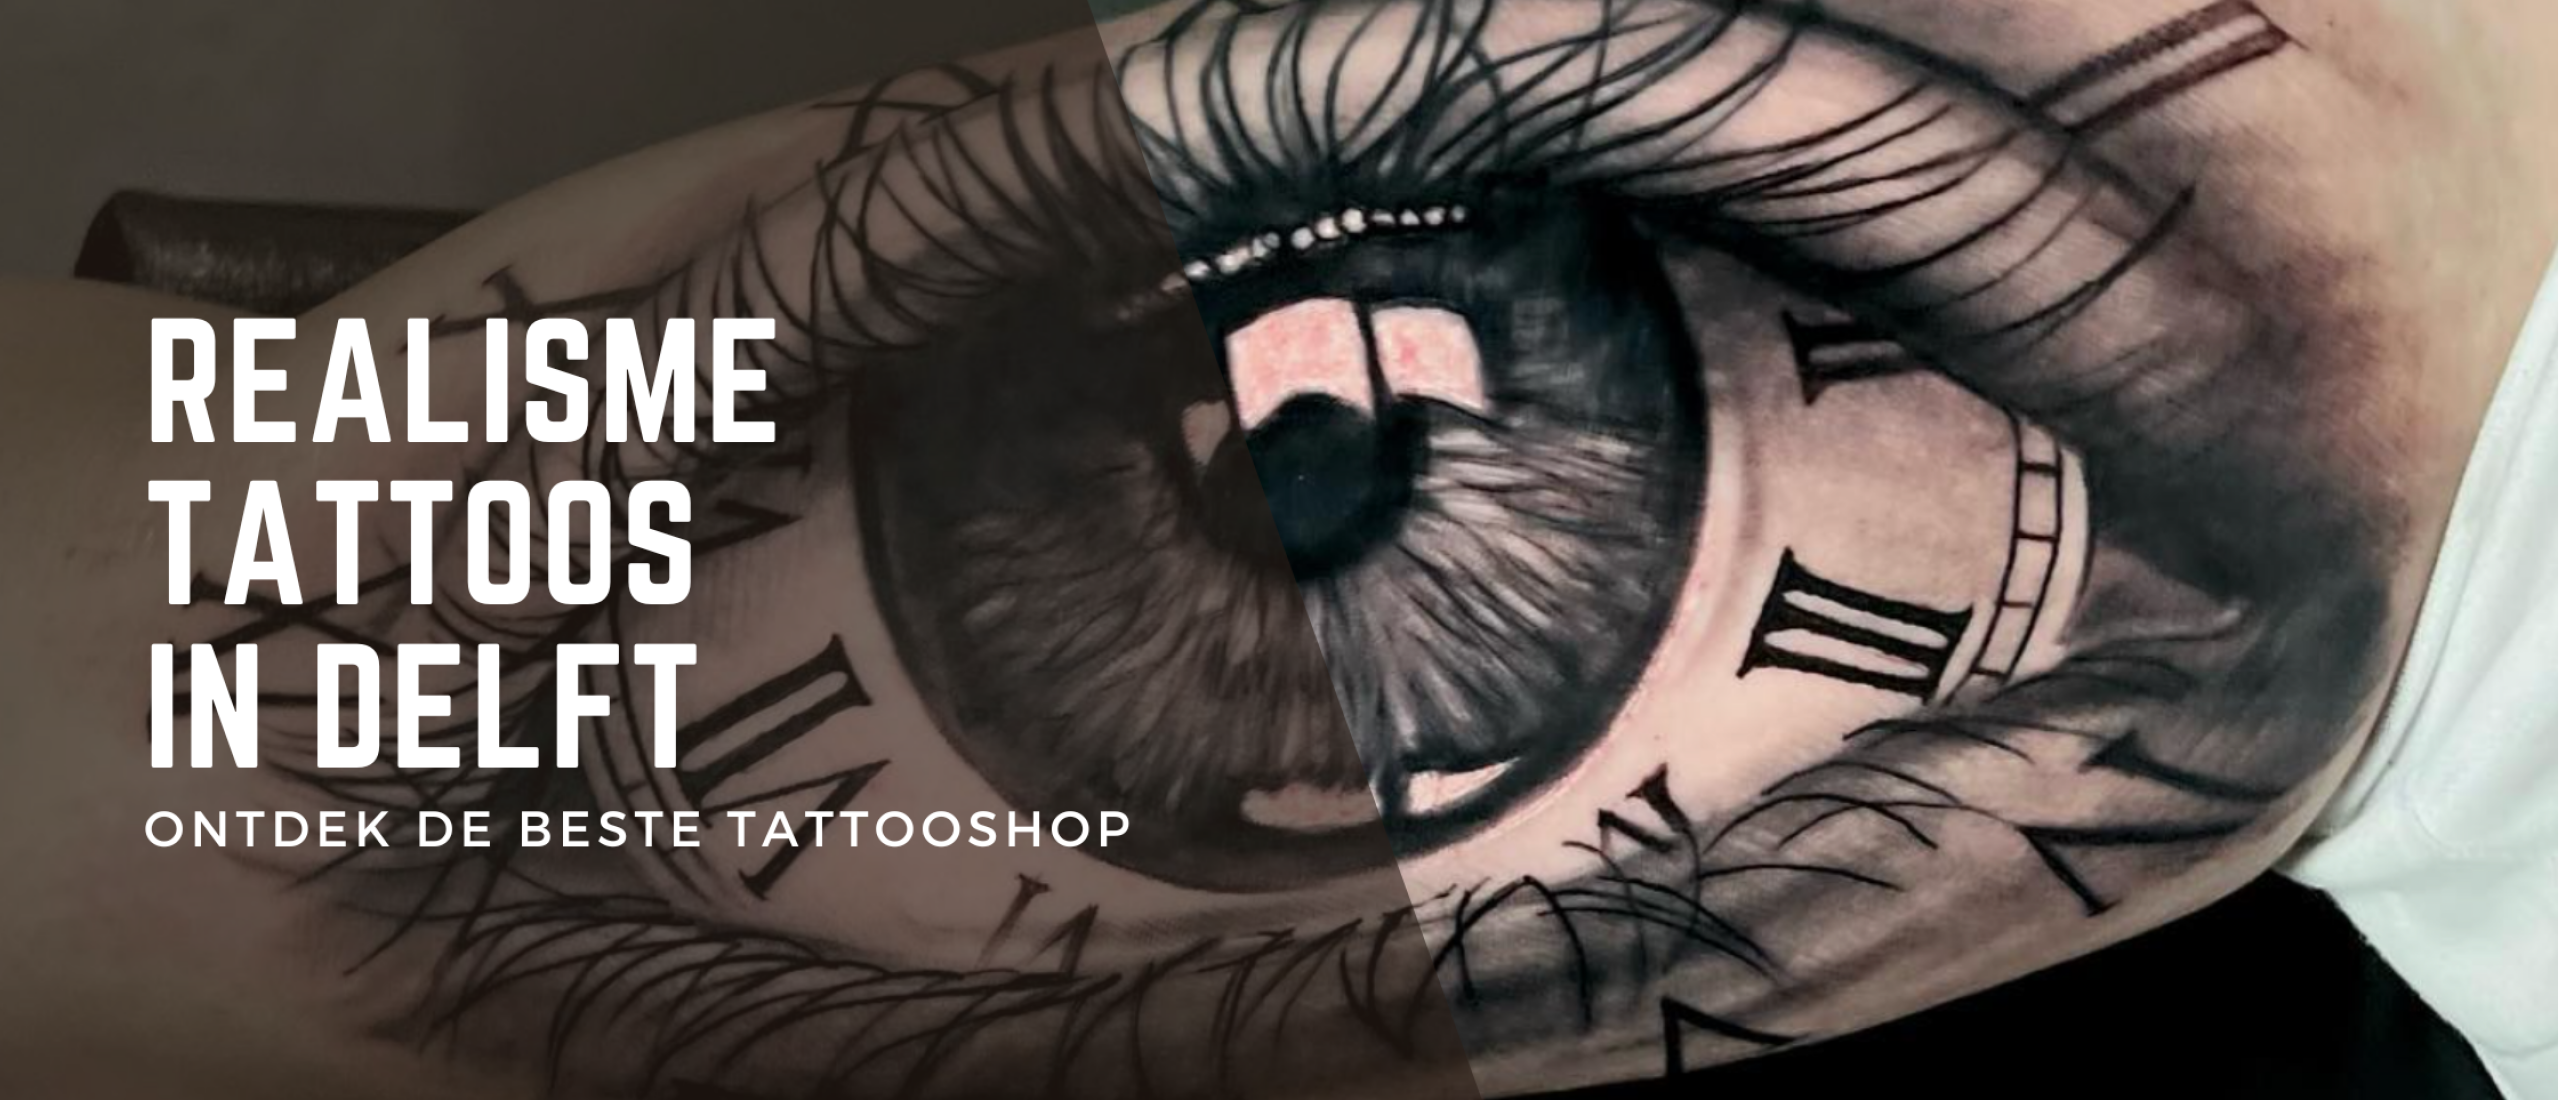 Realisme tattoos in Delft